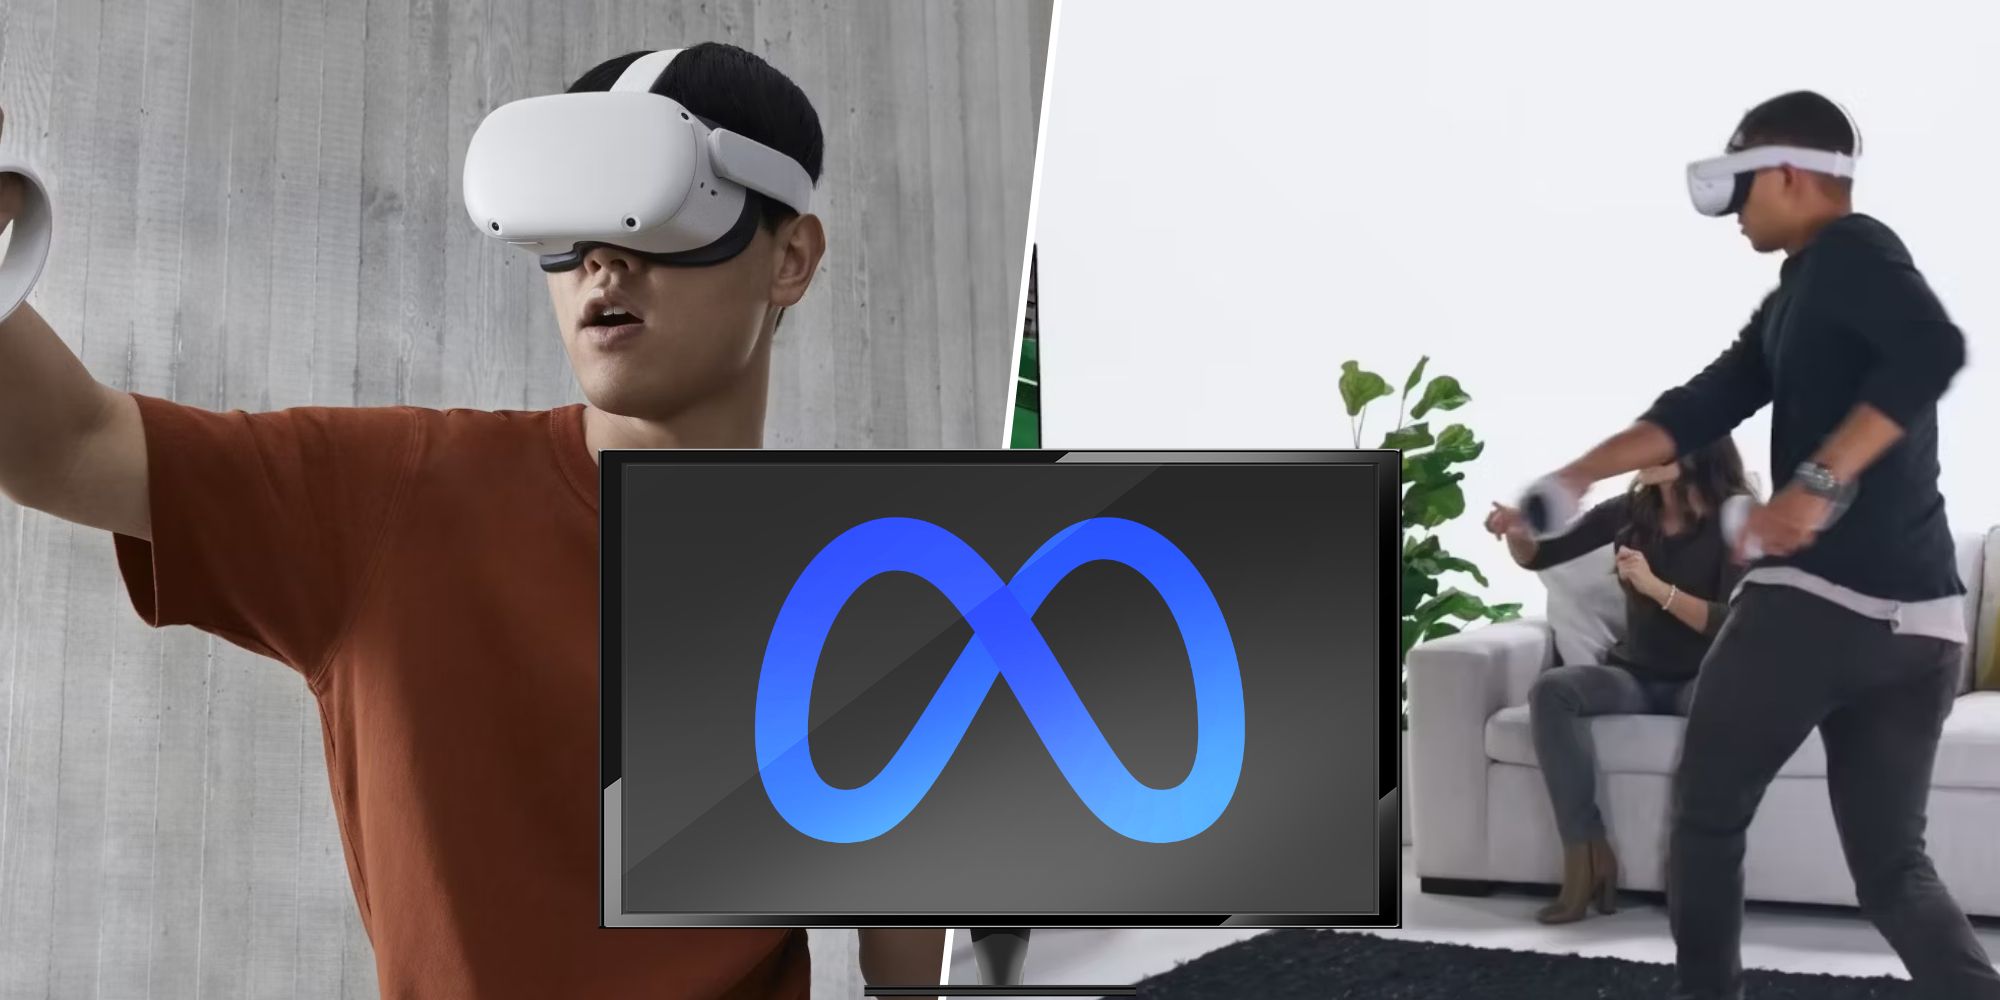 Is the Shared With Me tab on the Oculus website new? Is this how